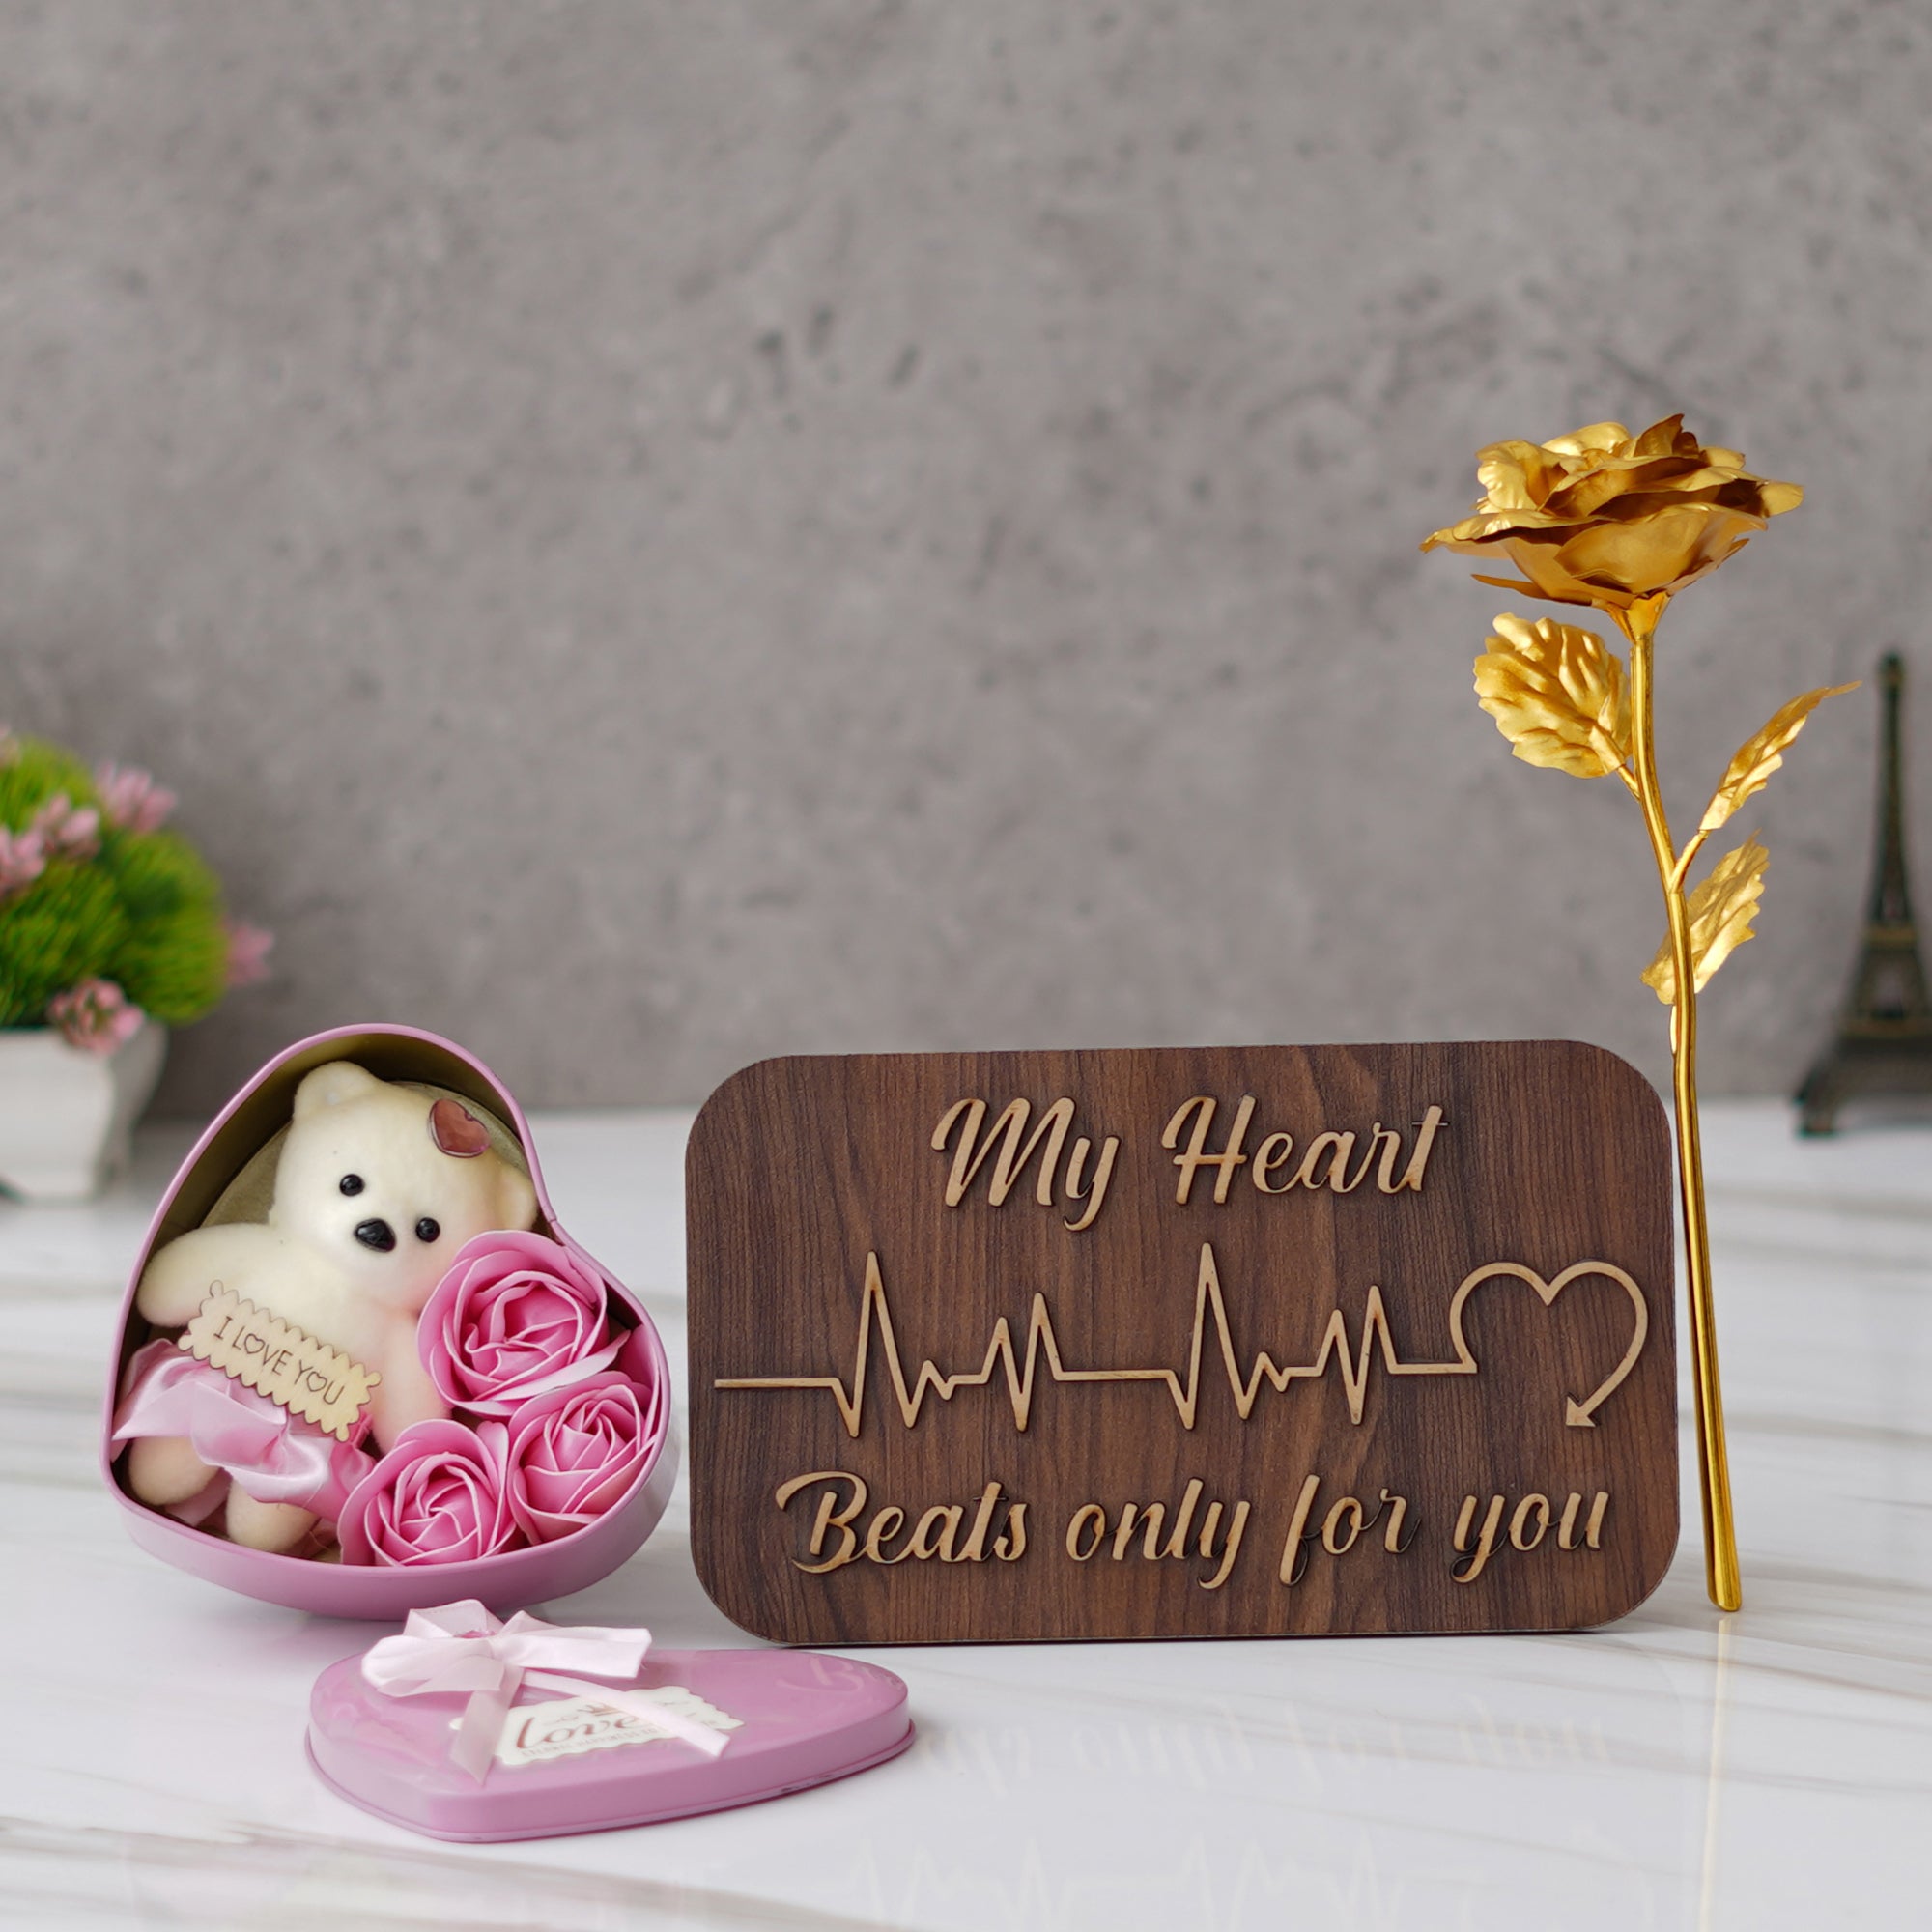 Valentine Combo of Golden Rose Gift Set, "My Heart Beats Only For You" Wooden Showpiece With Stand, Pink Heart Shaped Gift Box with Teddy and Roses